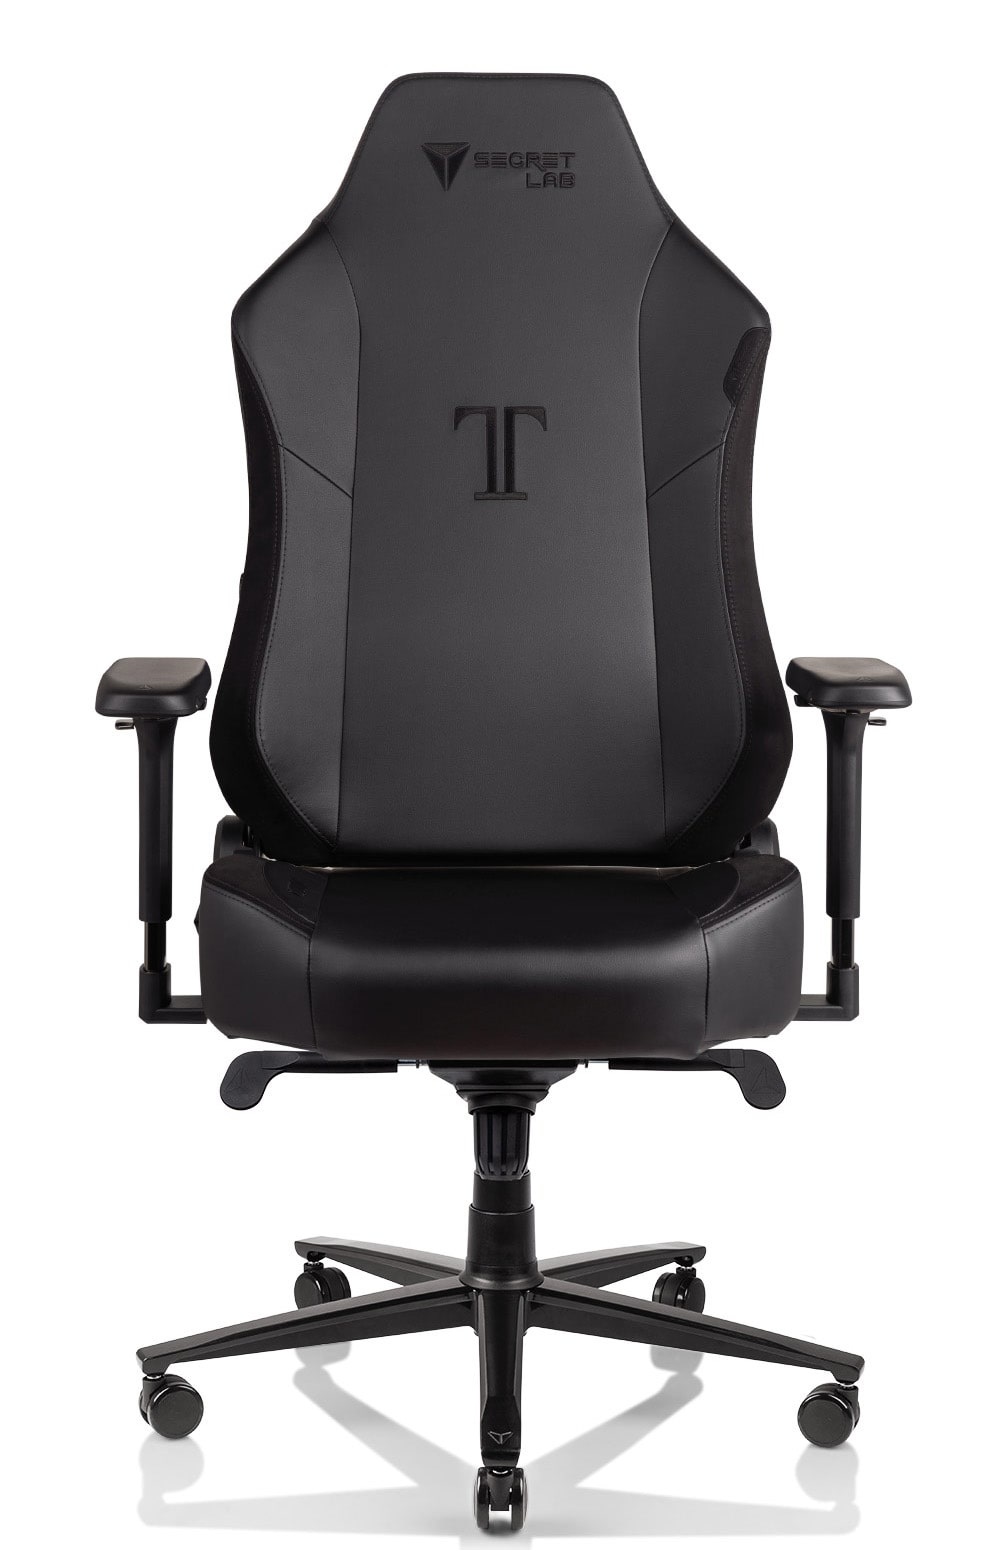 Secretlab Titan Evo Review: Is This Gaming Chair Good for Working From  Home?